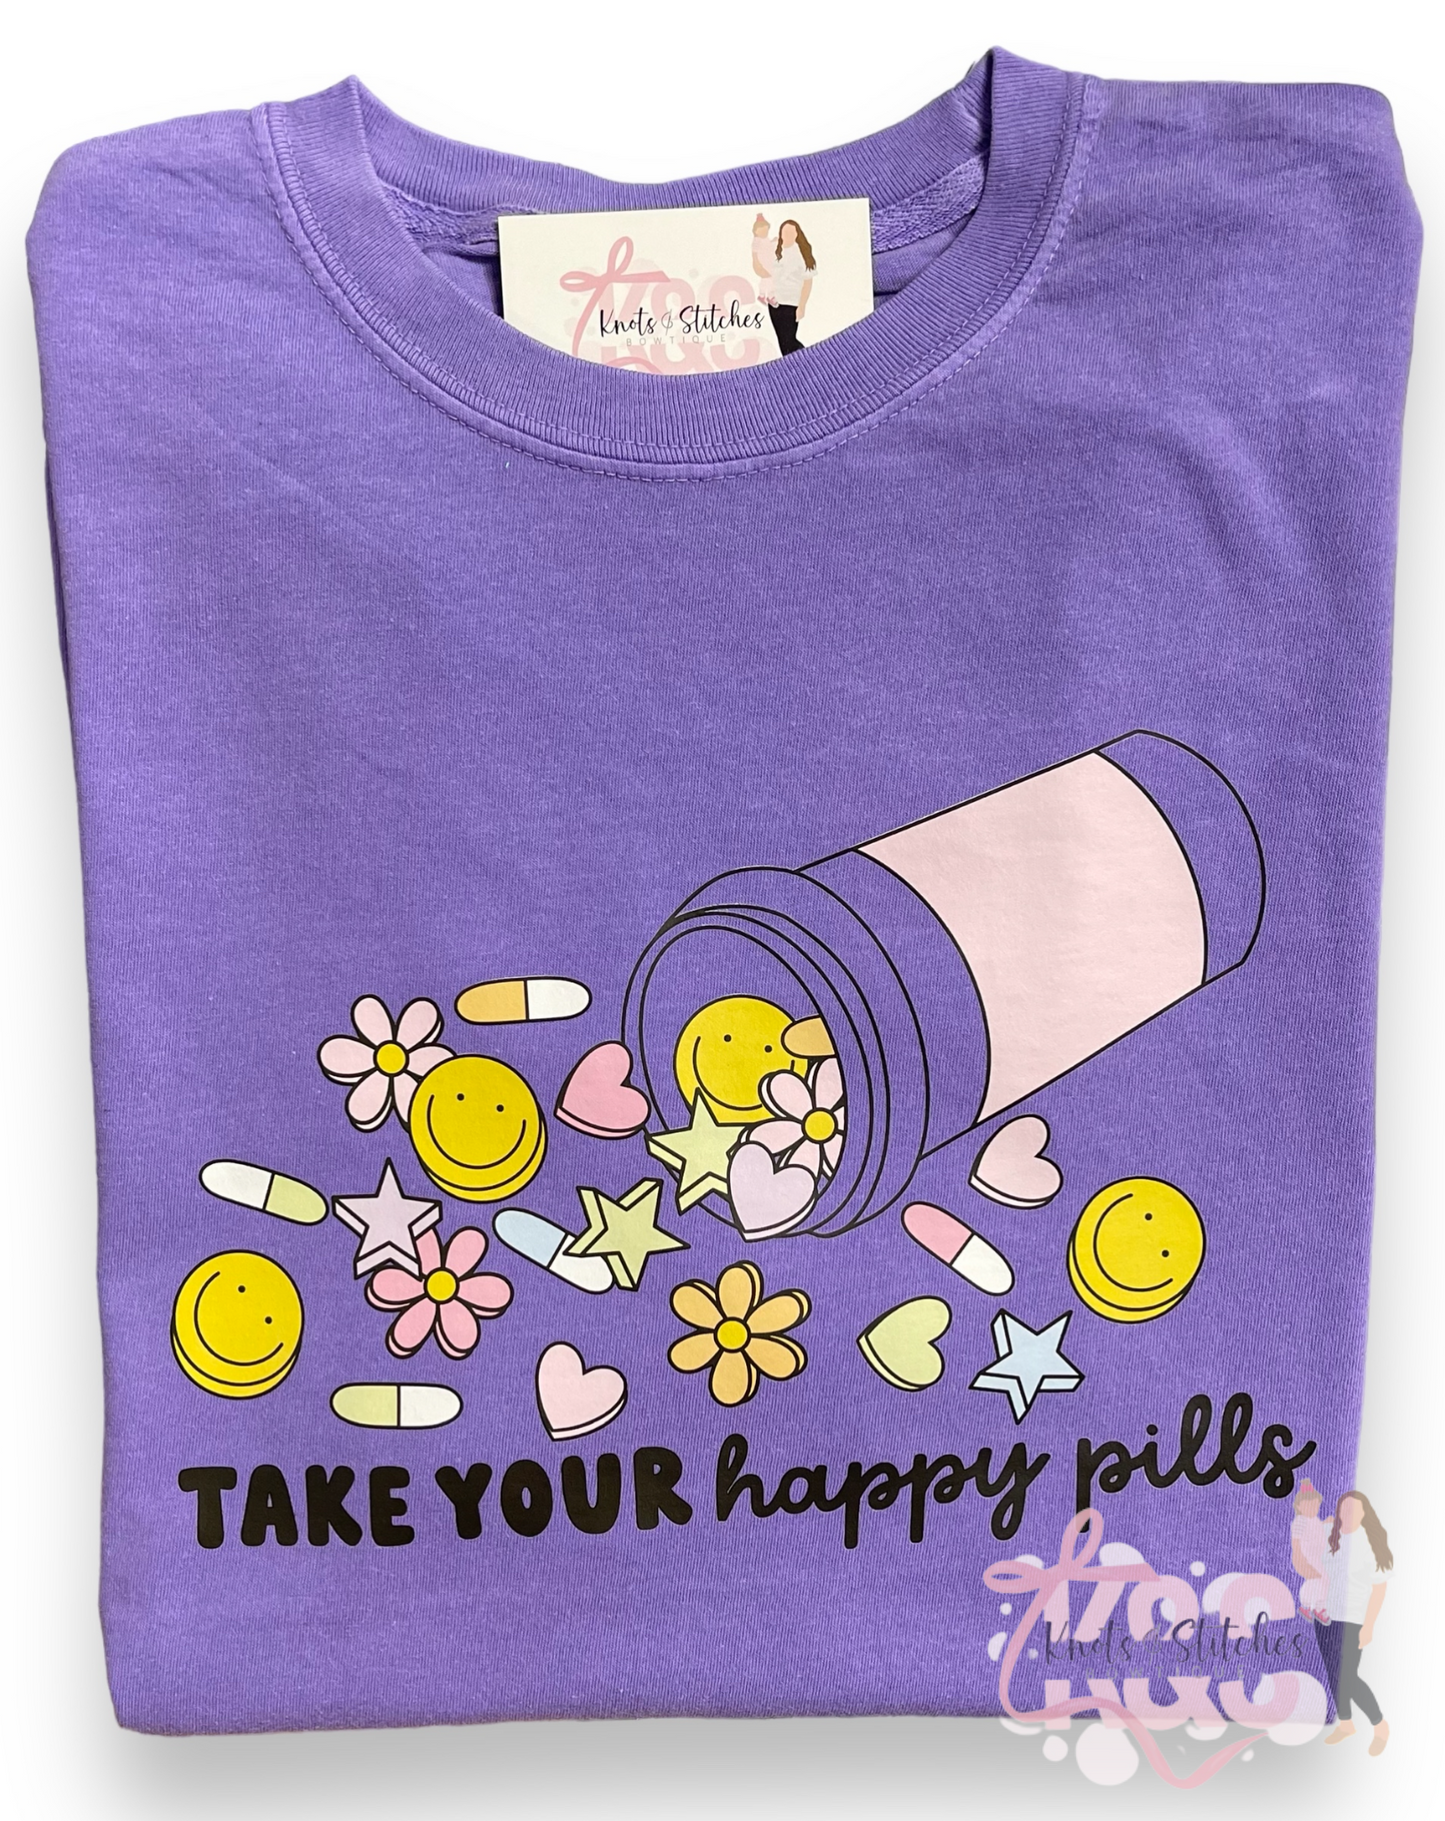 Take your happy pills